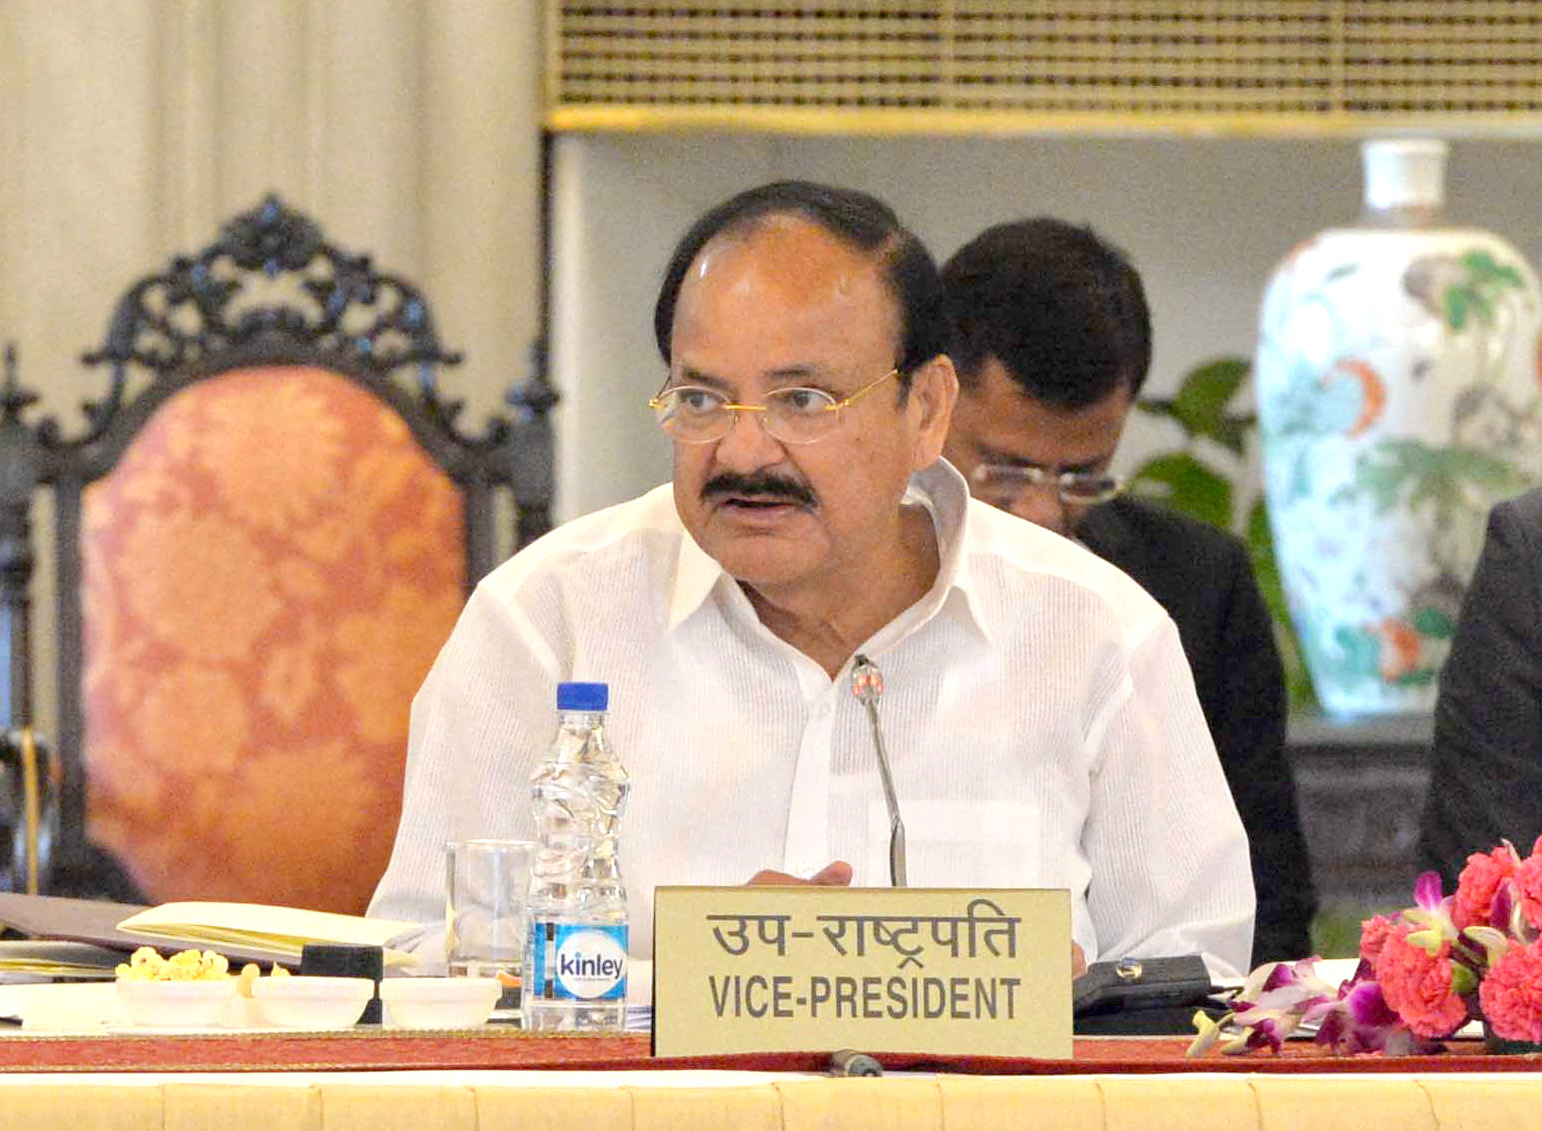 The Vice President, Shri M. Venkaiah Naidu addressing the Governors and Lt. Governors in the Conference of Governors 2018, at Rashtrapati Bhawan, in New Delhi on June 05, 2018.